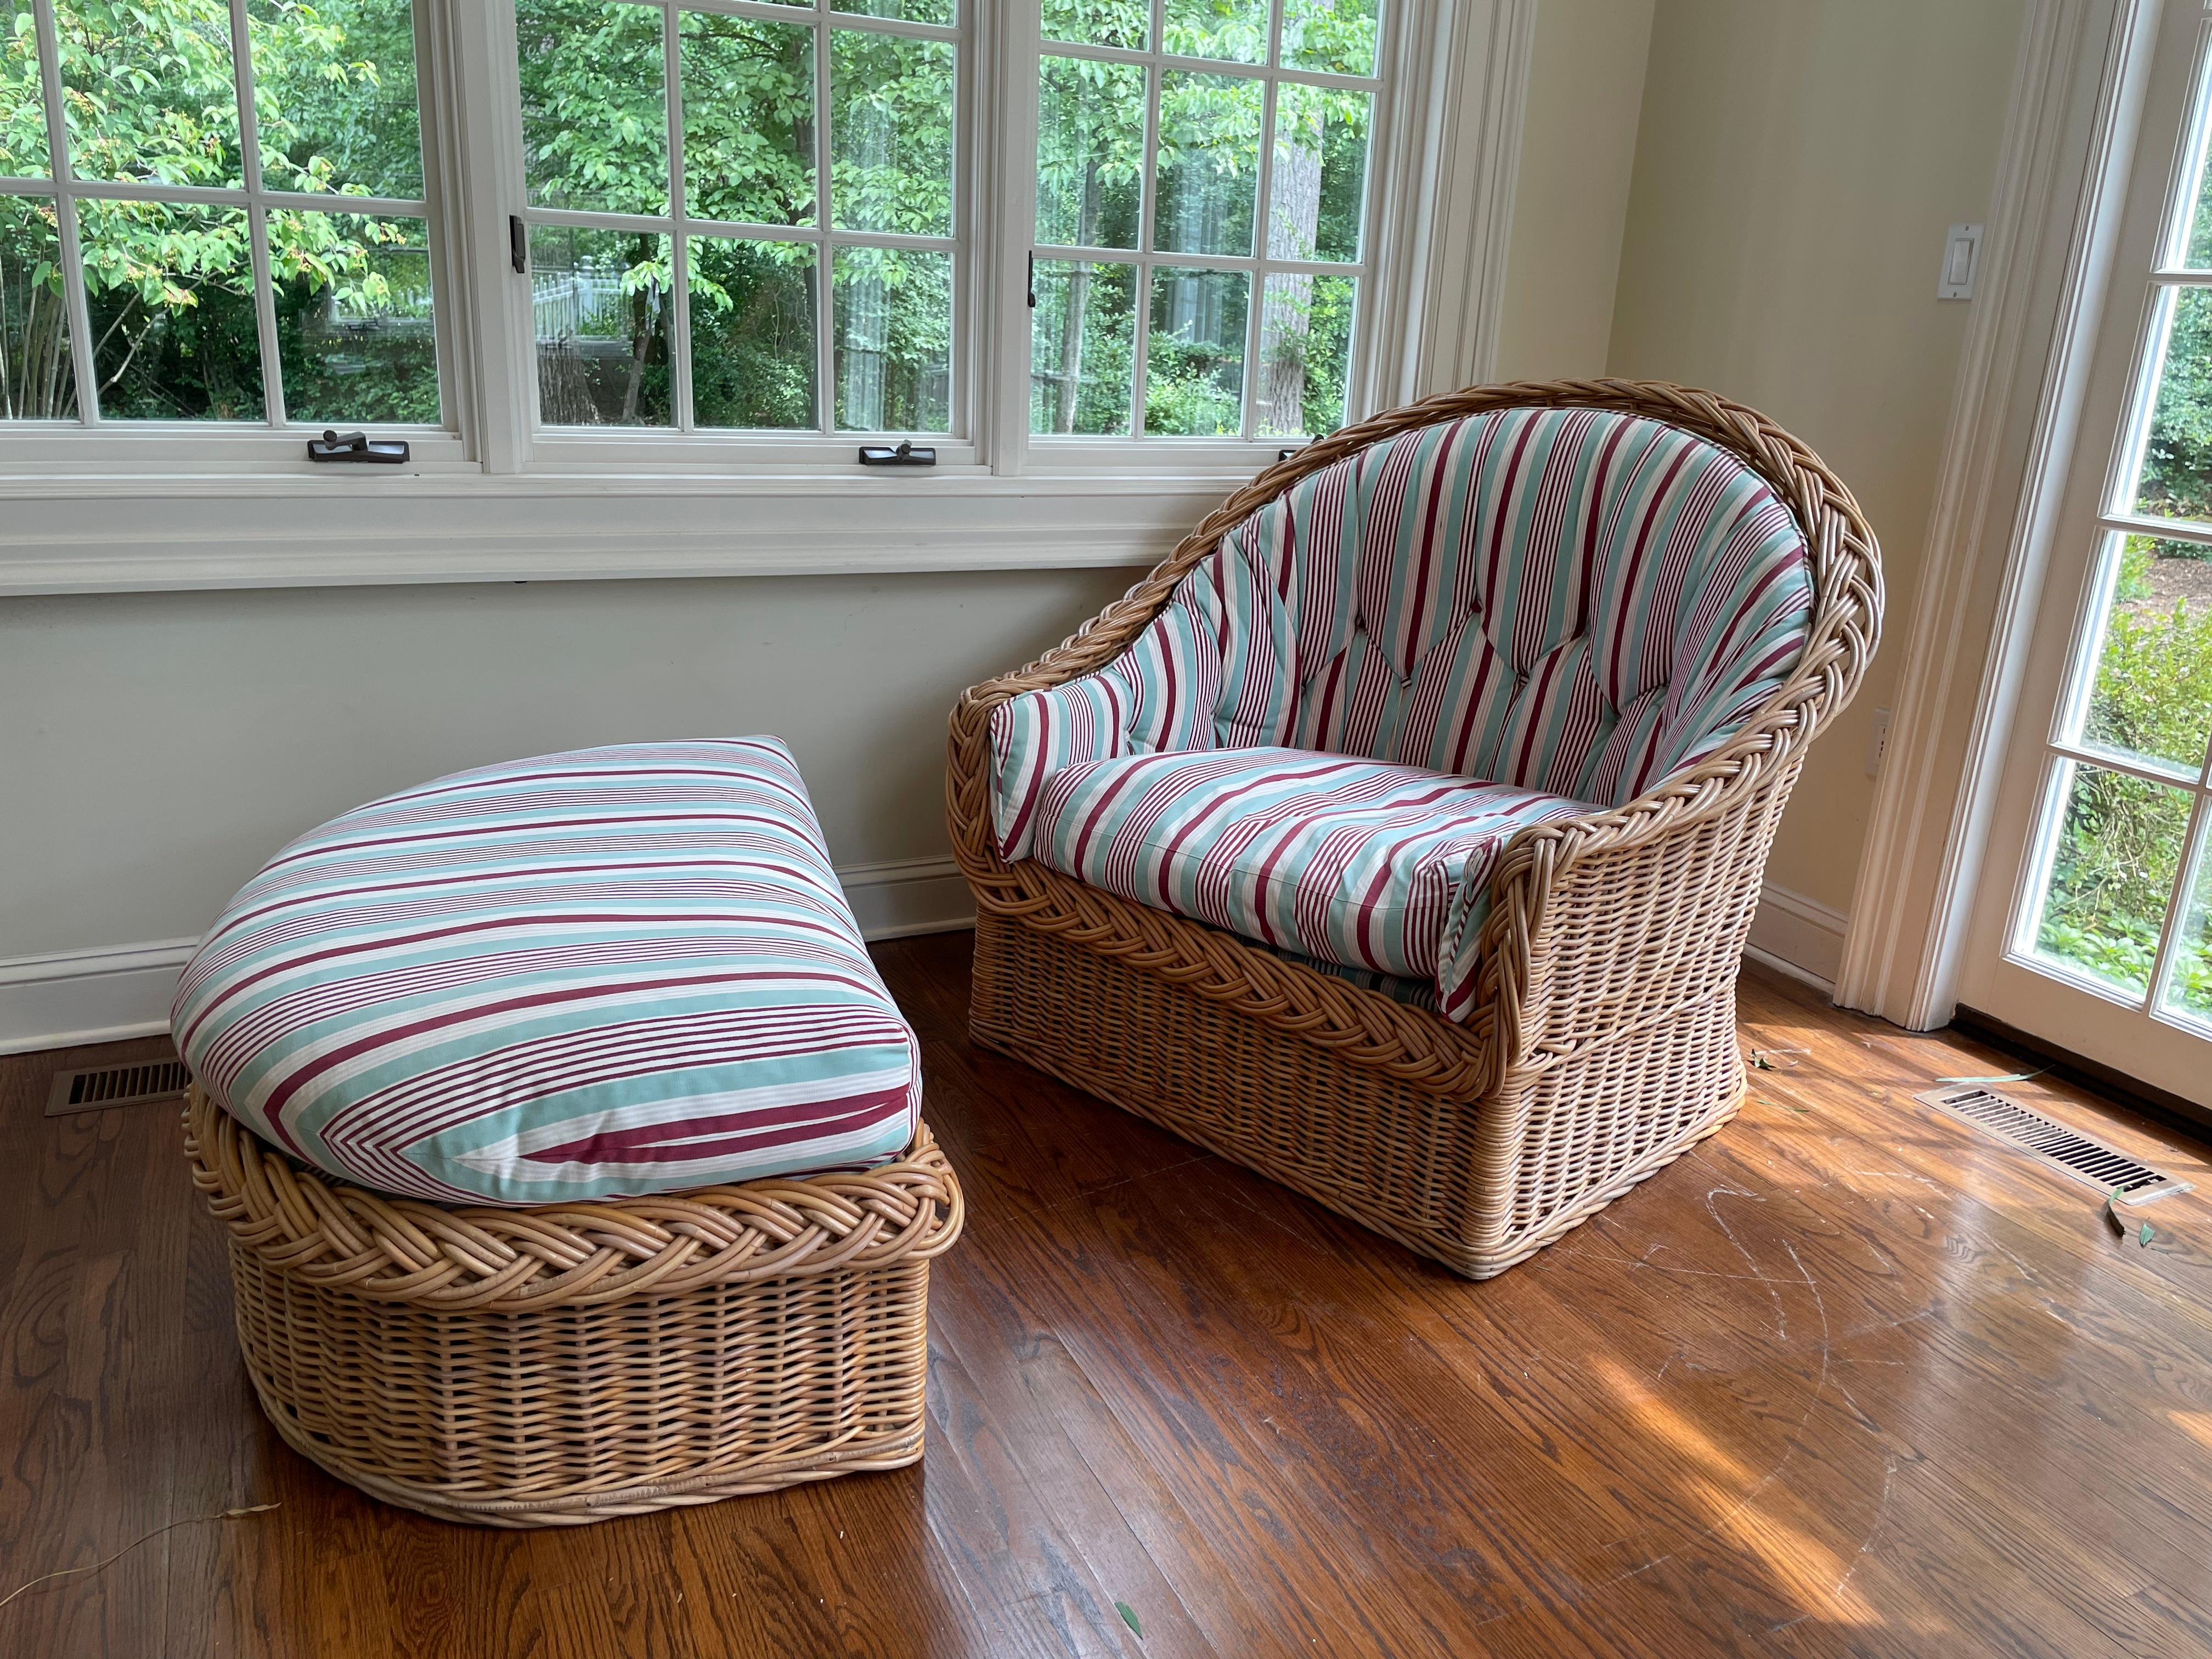 Woven and braided Italian rattan barrel back lounge chair and matching ottoman from The Wicker Works by Peter Rocchia San Francisco CA ottoman measures 38”x27”x19” high